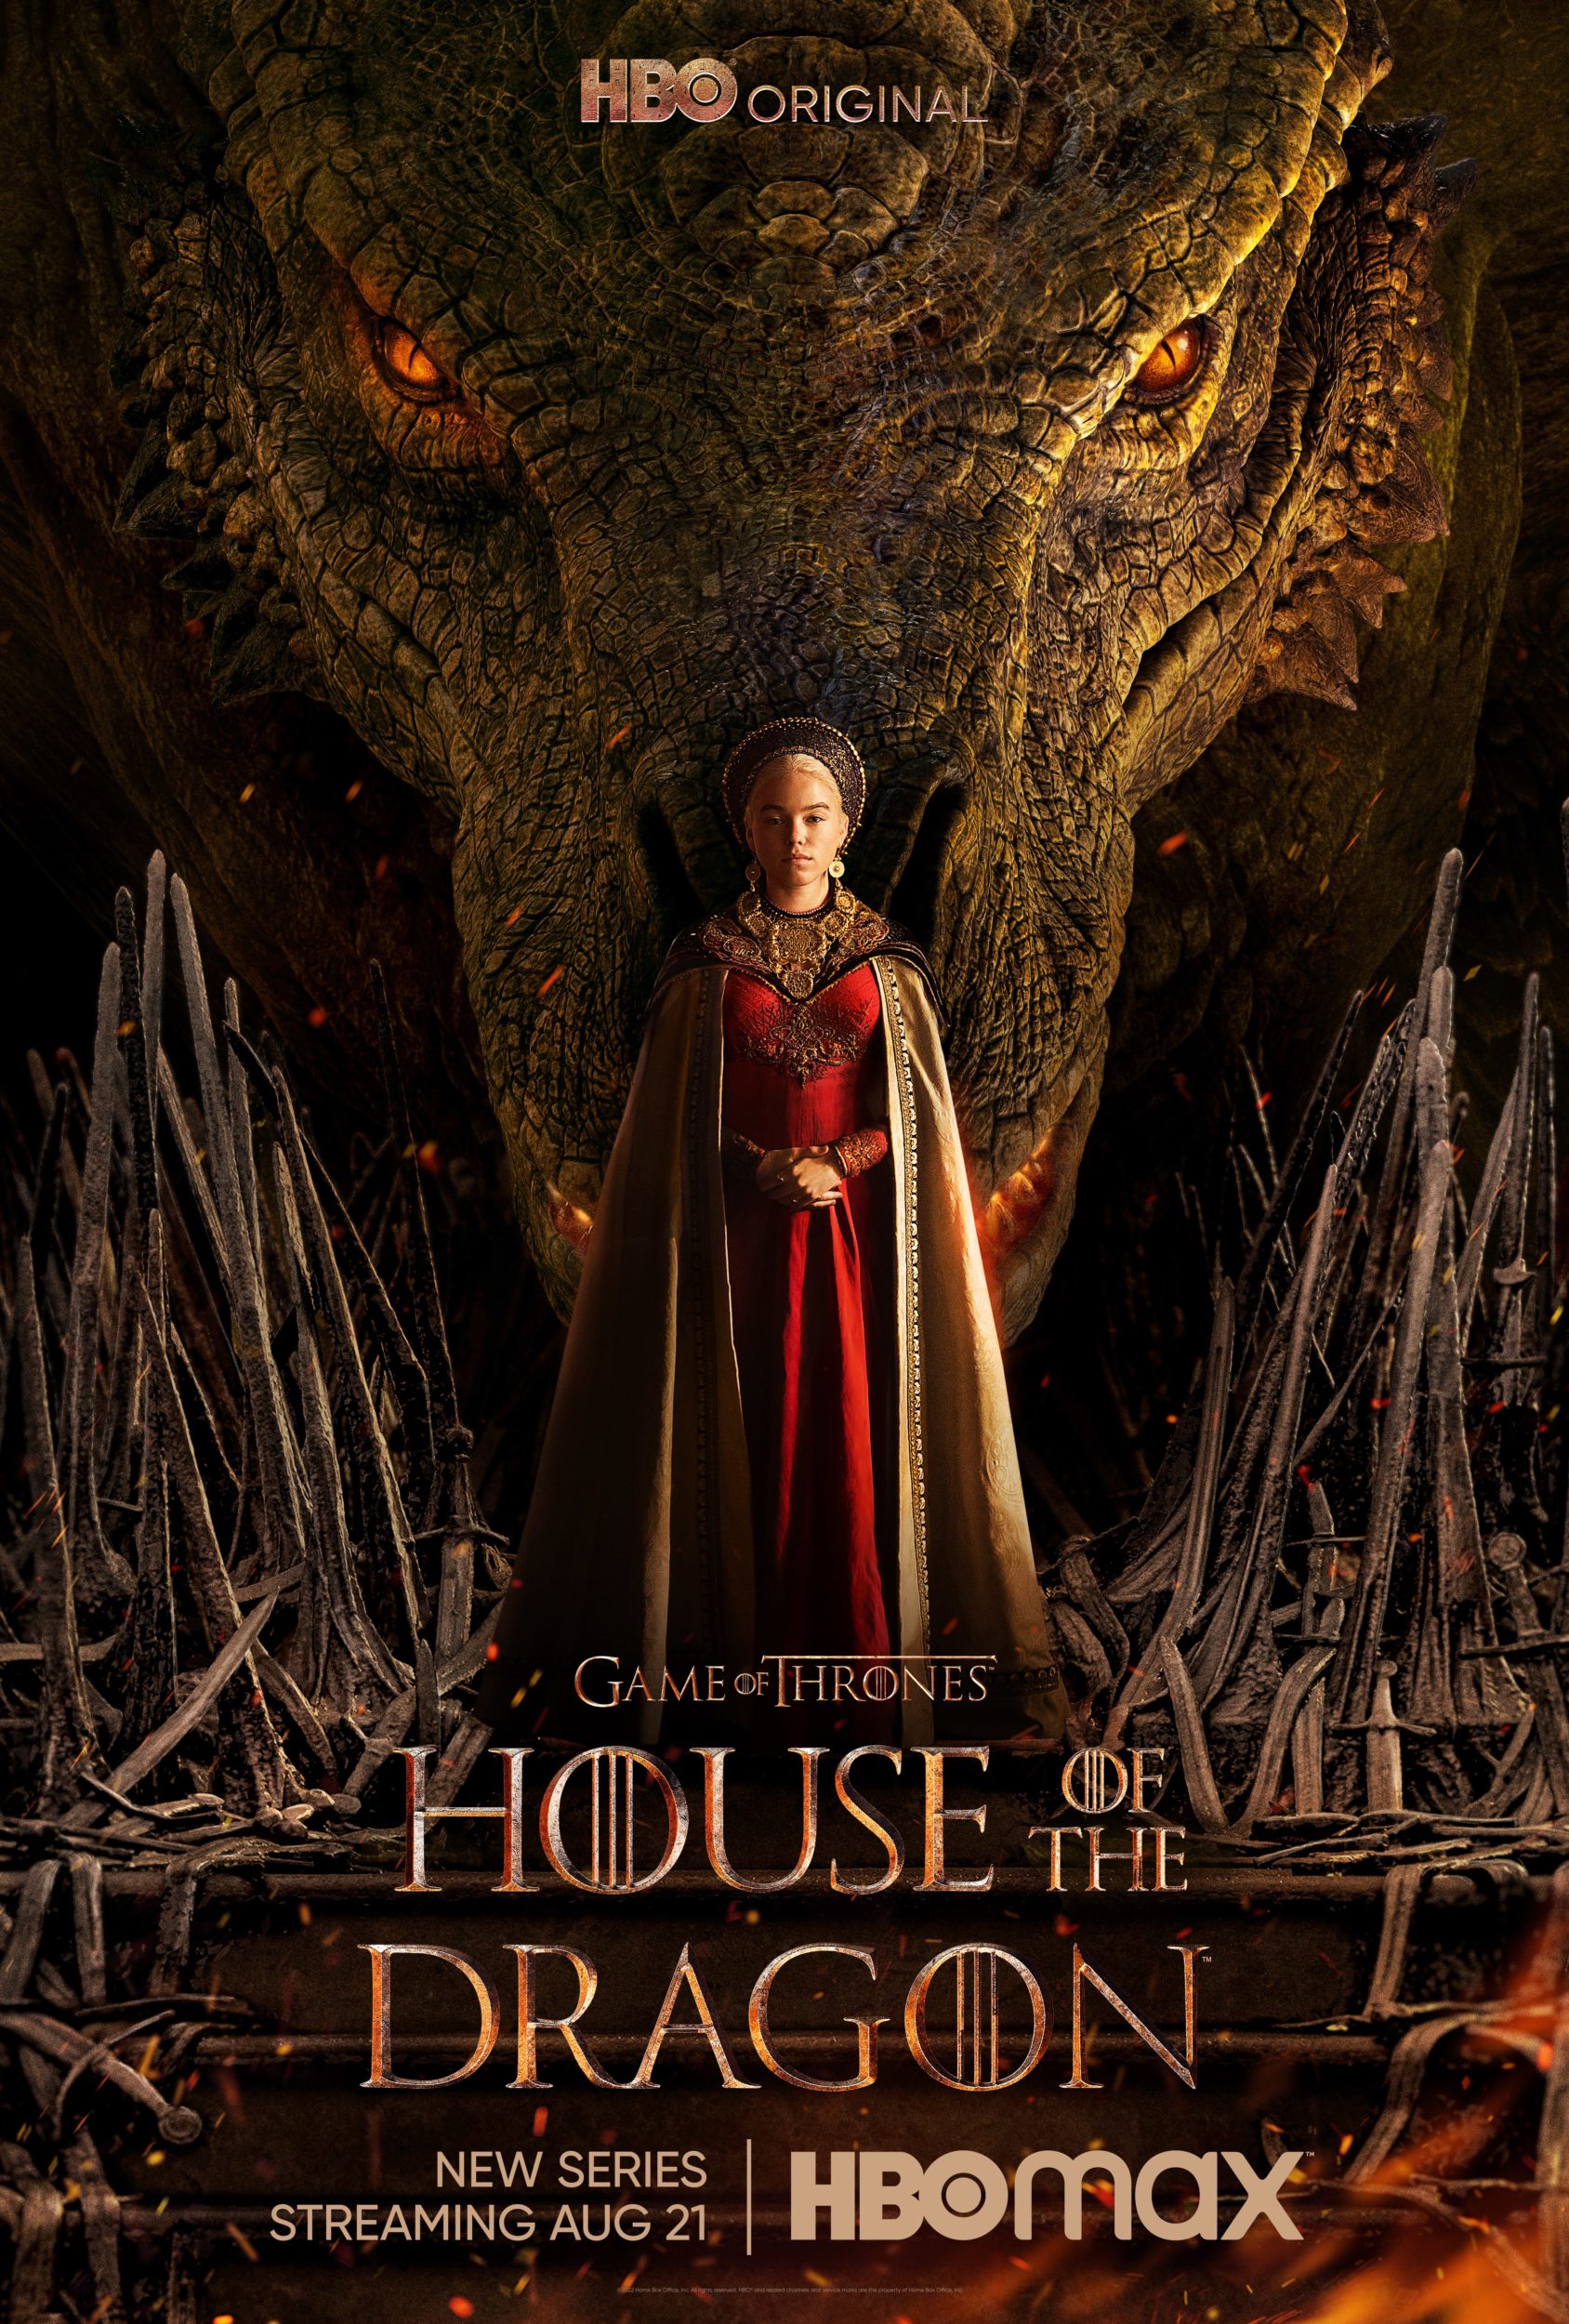 HBO Releases Official Key Art For “House of the Dragon” Warner Bros